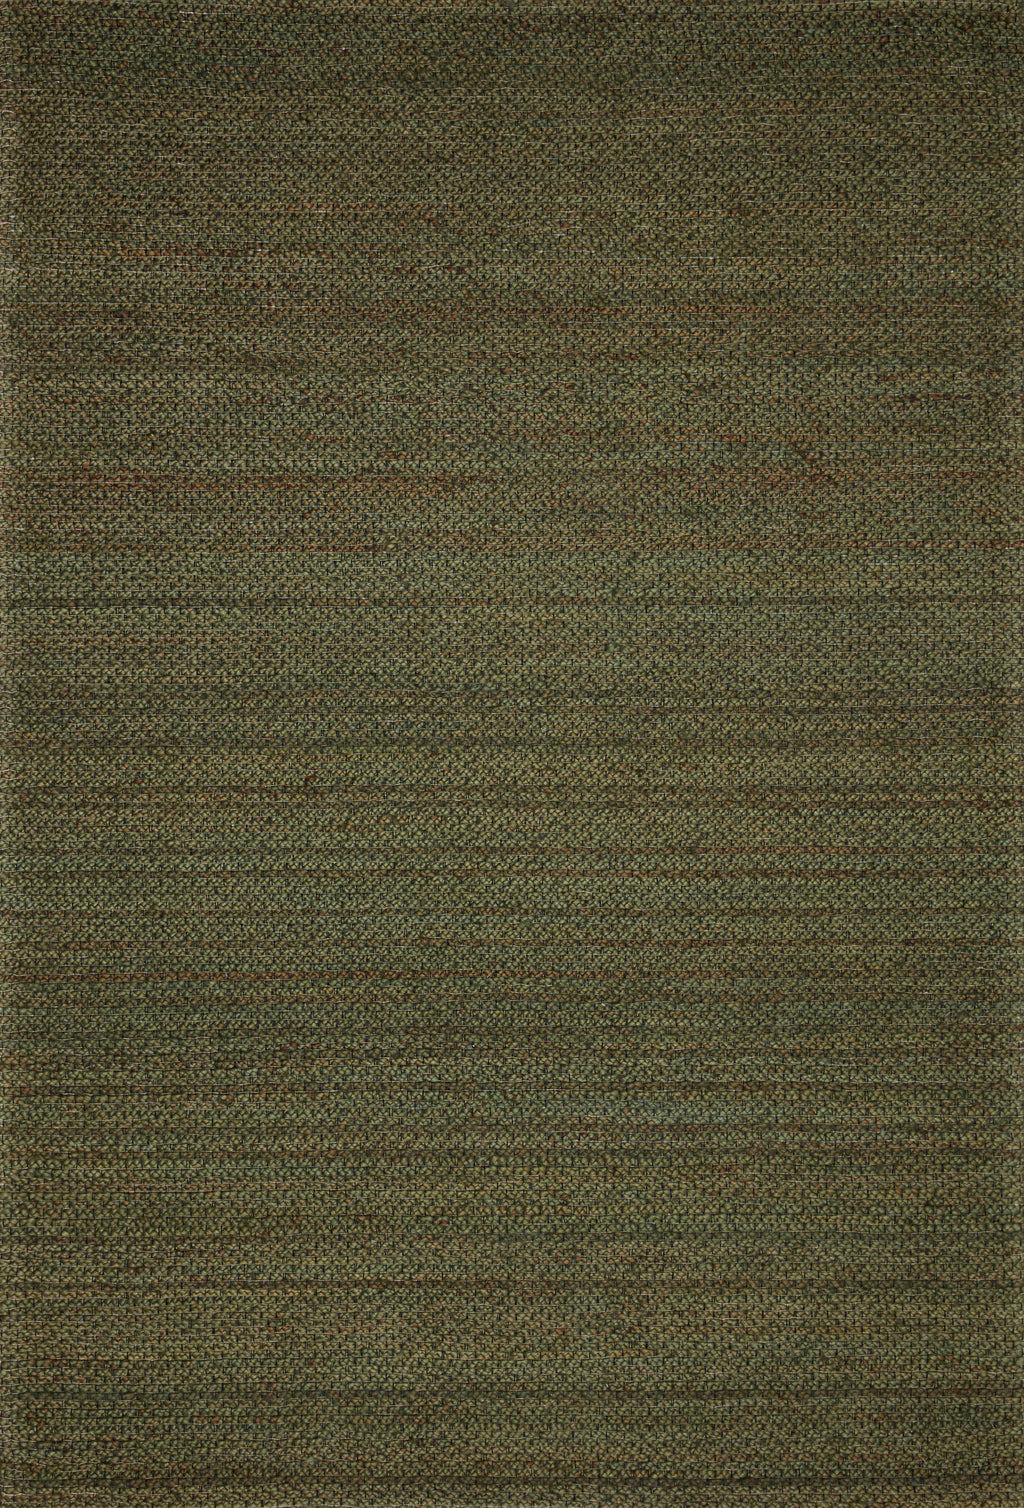 LILY Collection Rug  in  Green Green Accent Hand-Woven Viscose